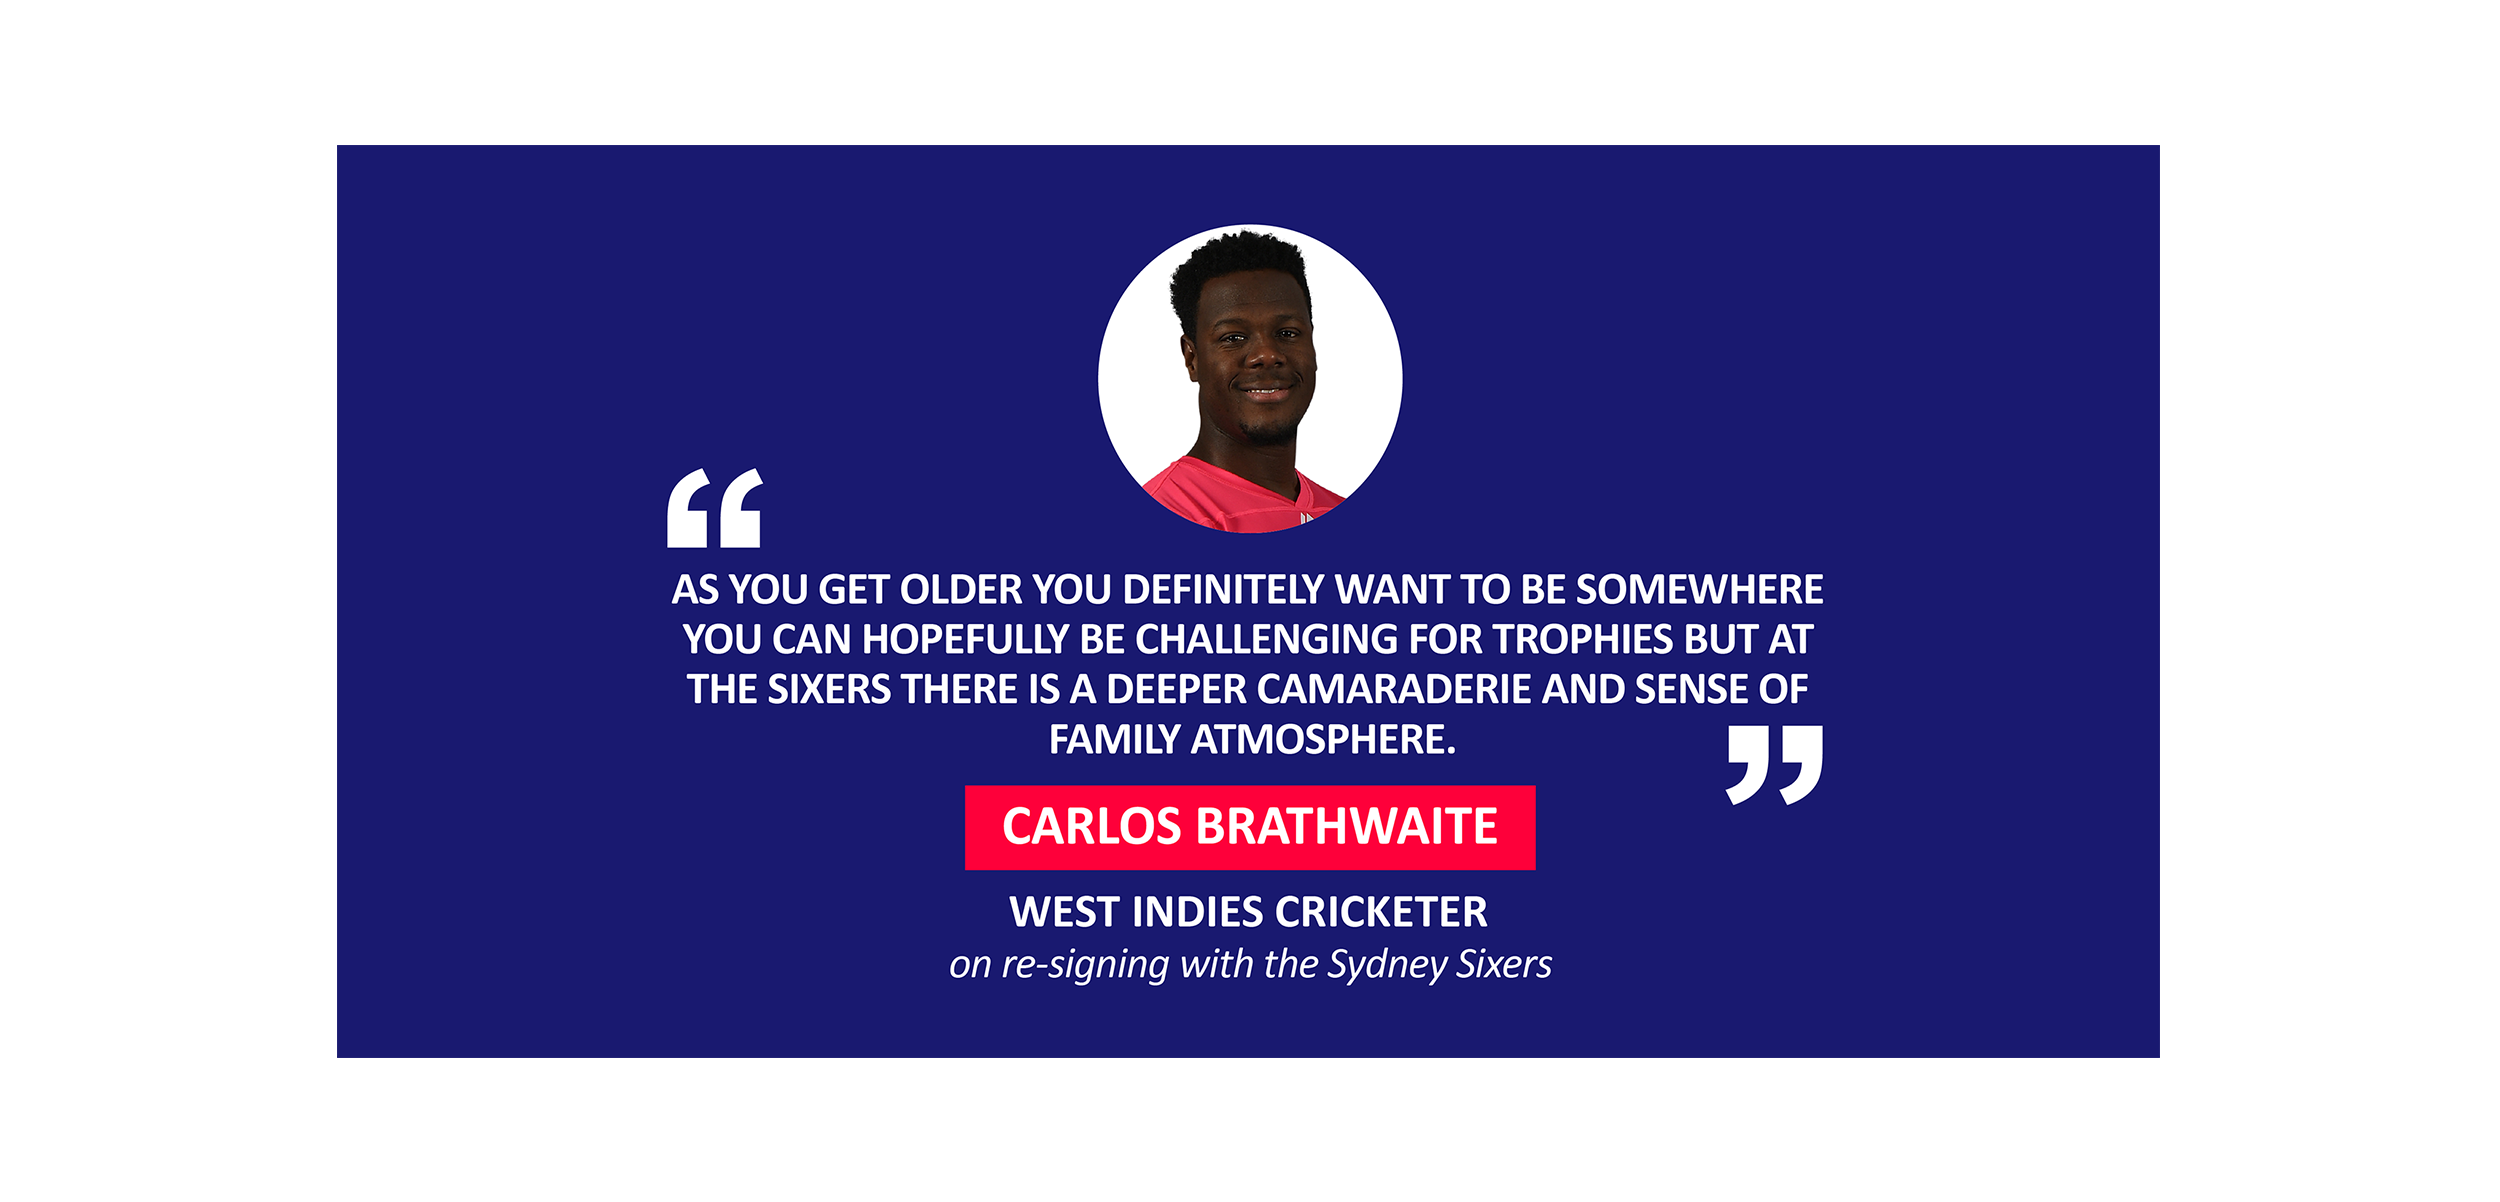 Carlos Brathwaite, West Indies Cricketer on re-signing with the Sydney Sixers